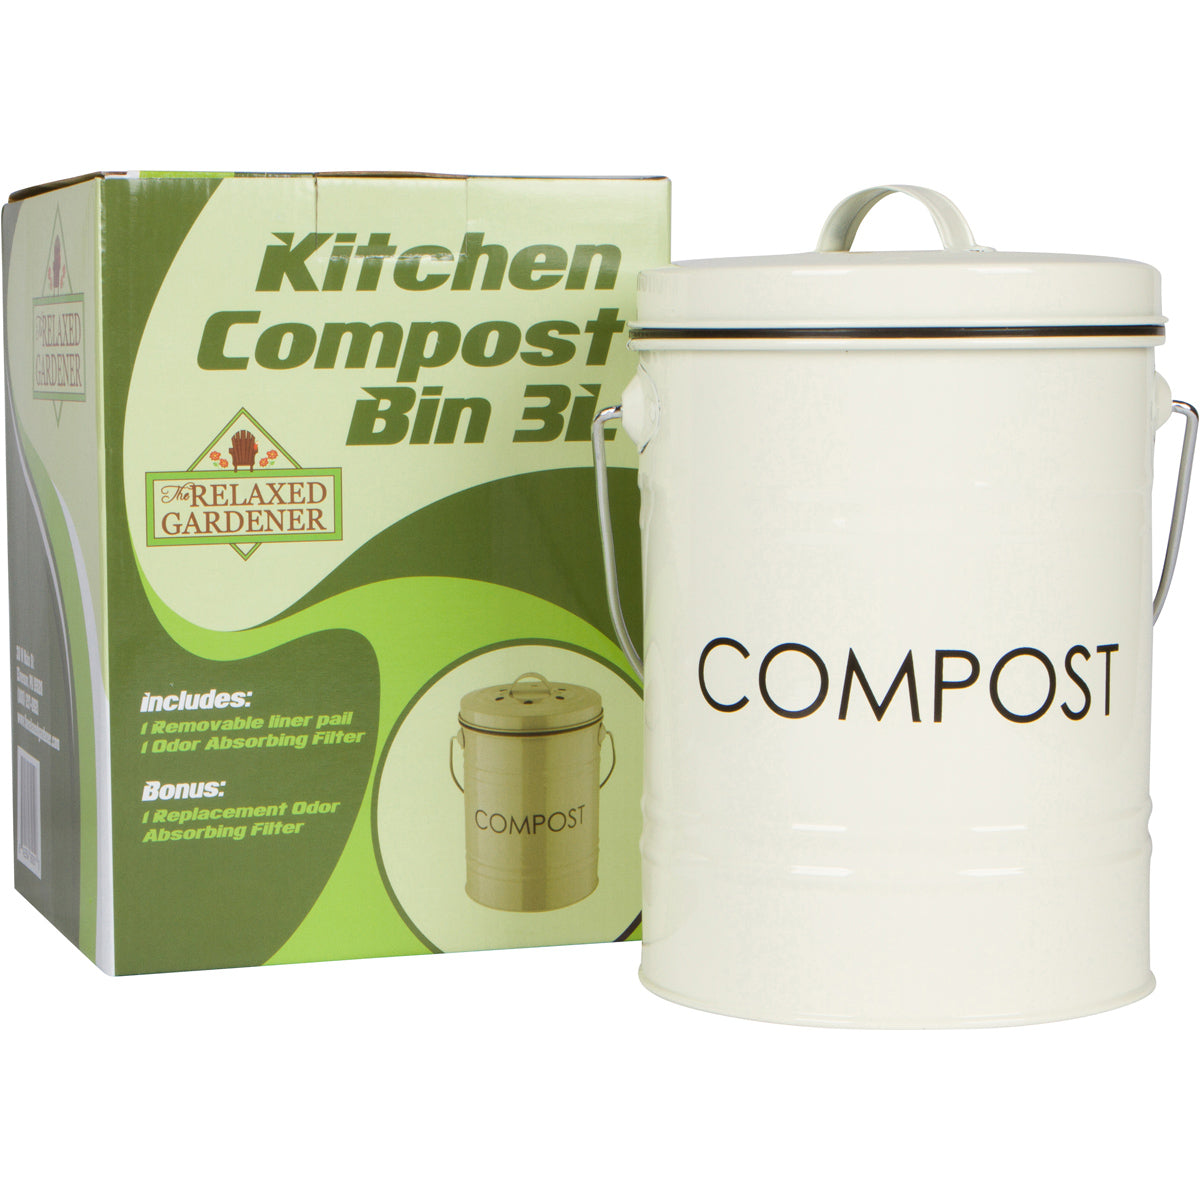 Gardens Alive! Counter Top Ceramic Compost Crock Kit 83413 - The